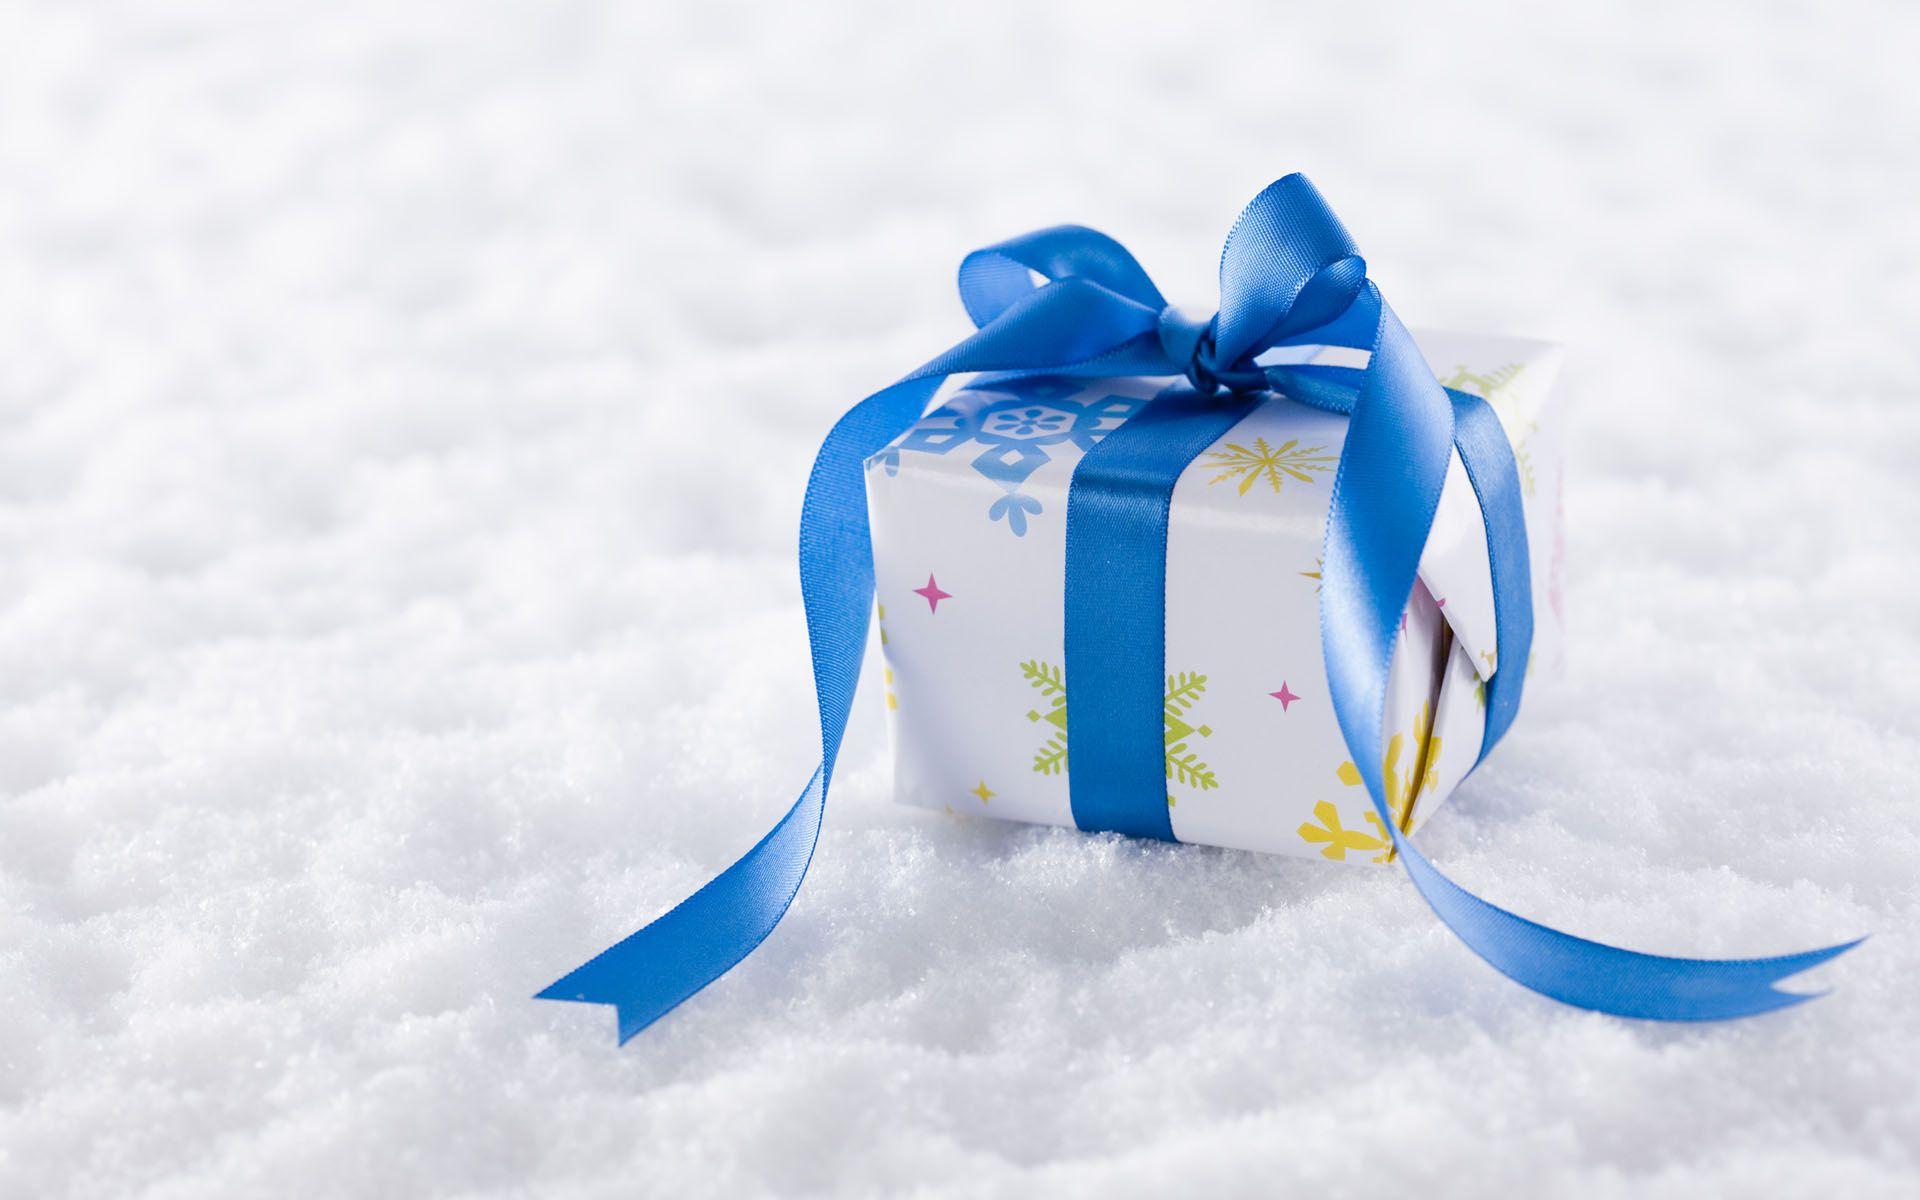 750+ Gift Box Pictures | Download Free Images & Stock Photos on Unsplash